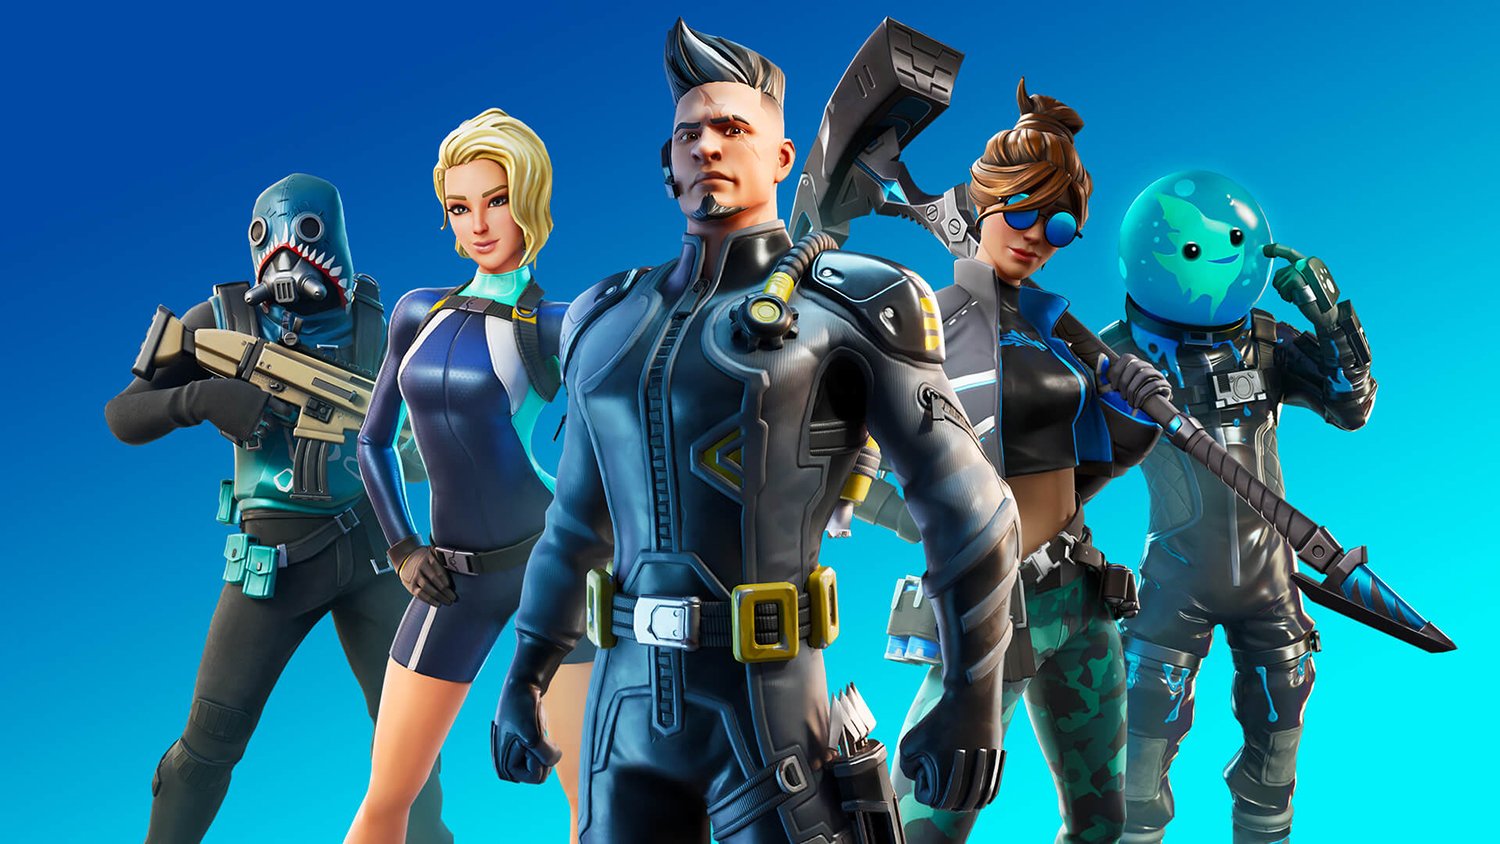 Epic Games 'Fortnite' cover art shows a group of fighters in blue uniforms